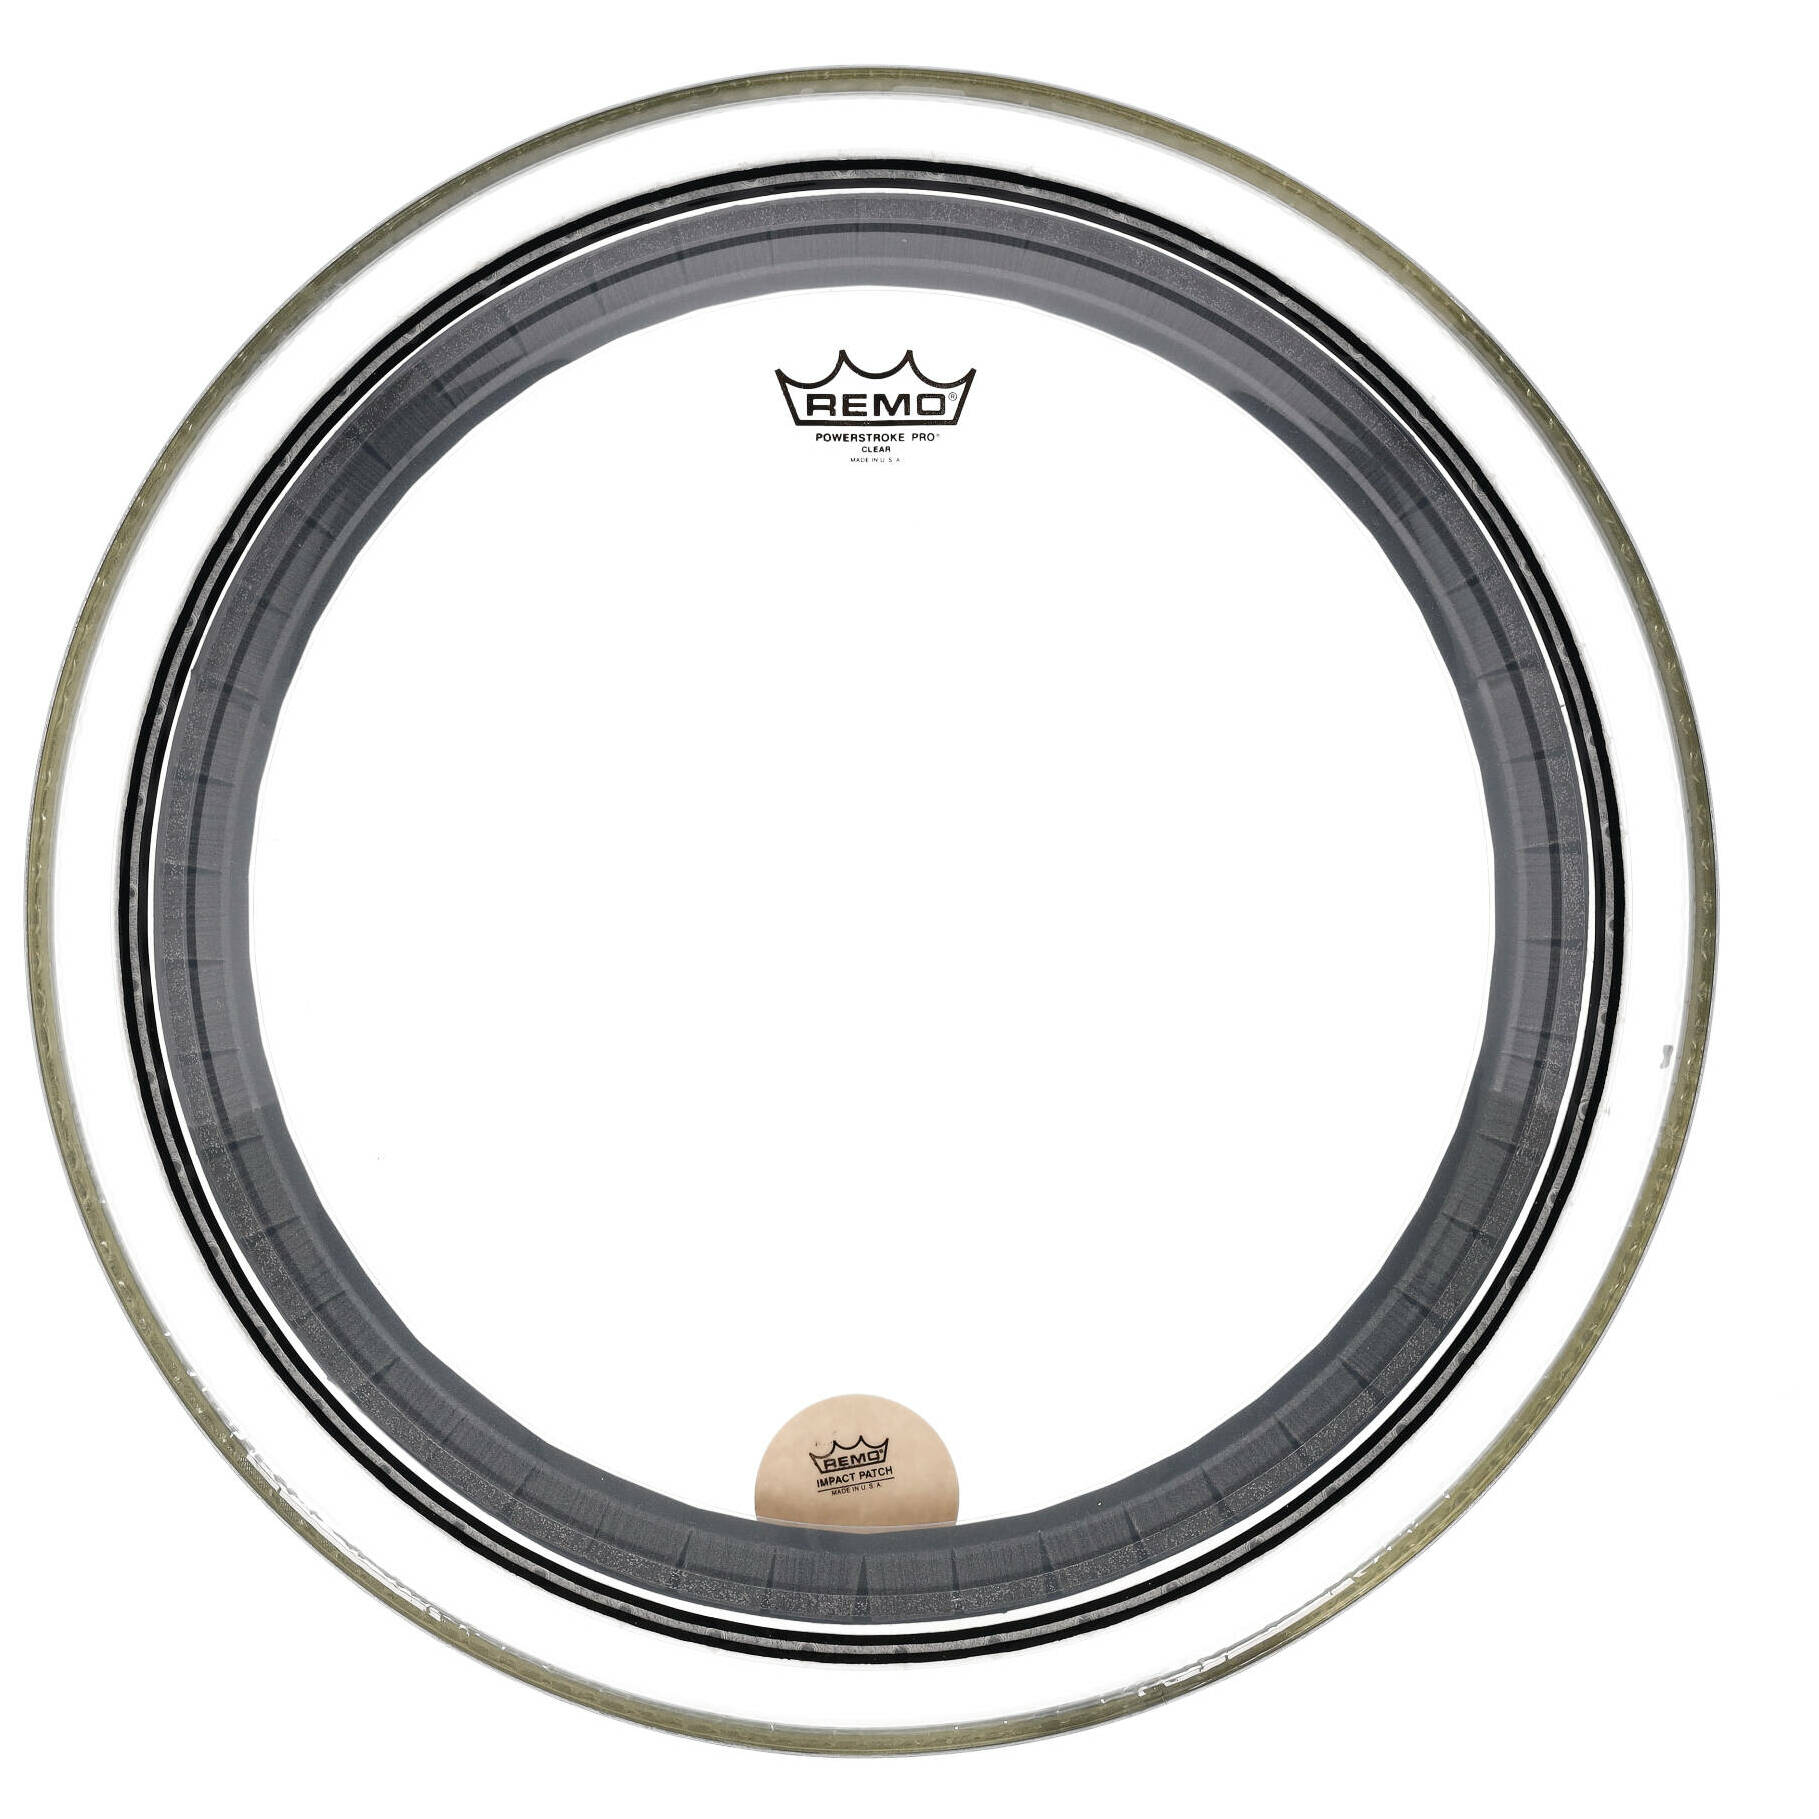 Remo Powerstroke Pro Bass Drum Fell - 20 Zoll - Clear